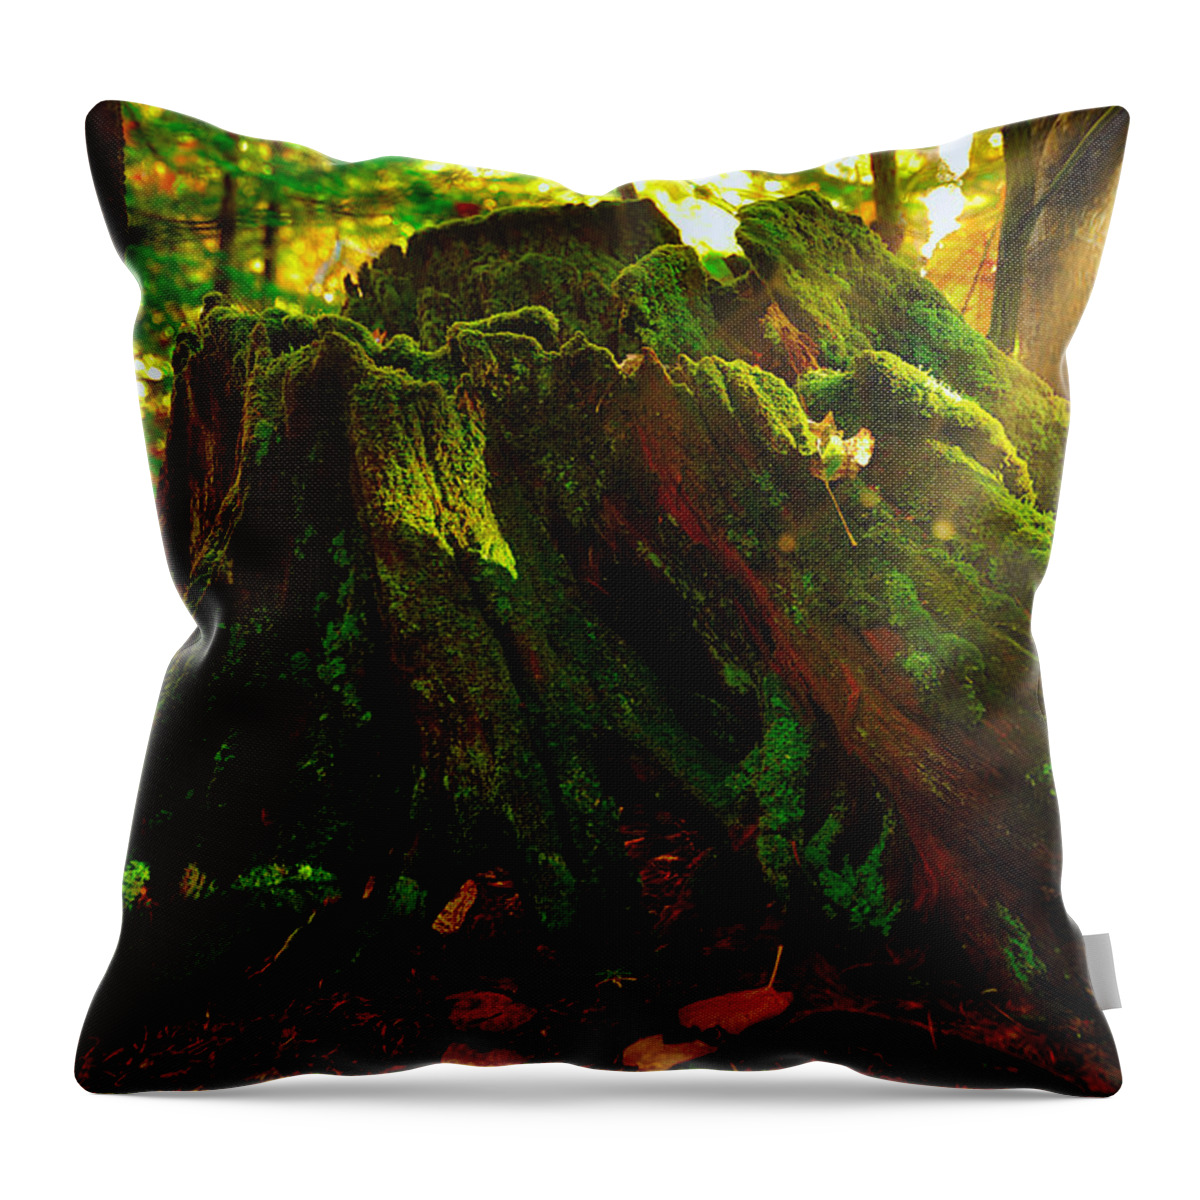 Photograph Throw Pillow featuring the photograph Life from Death by Richard Gehlbach